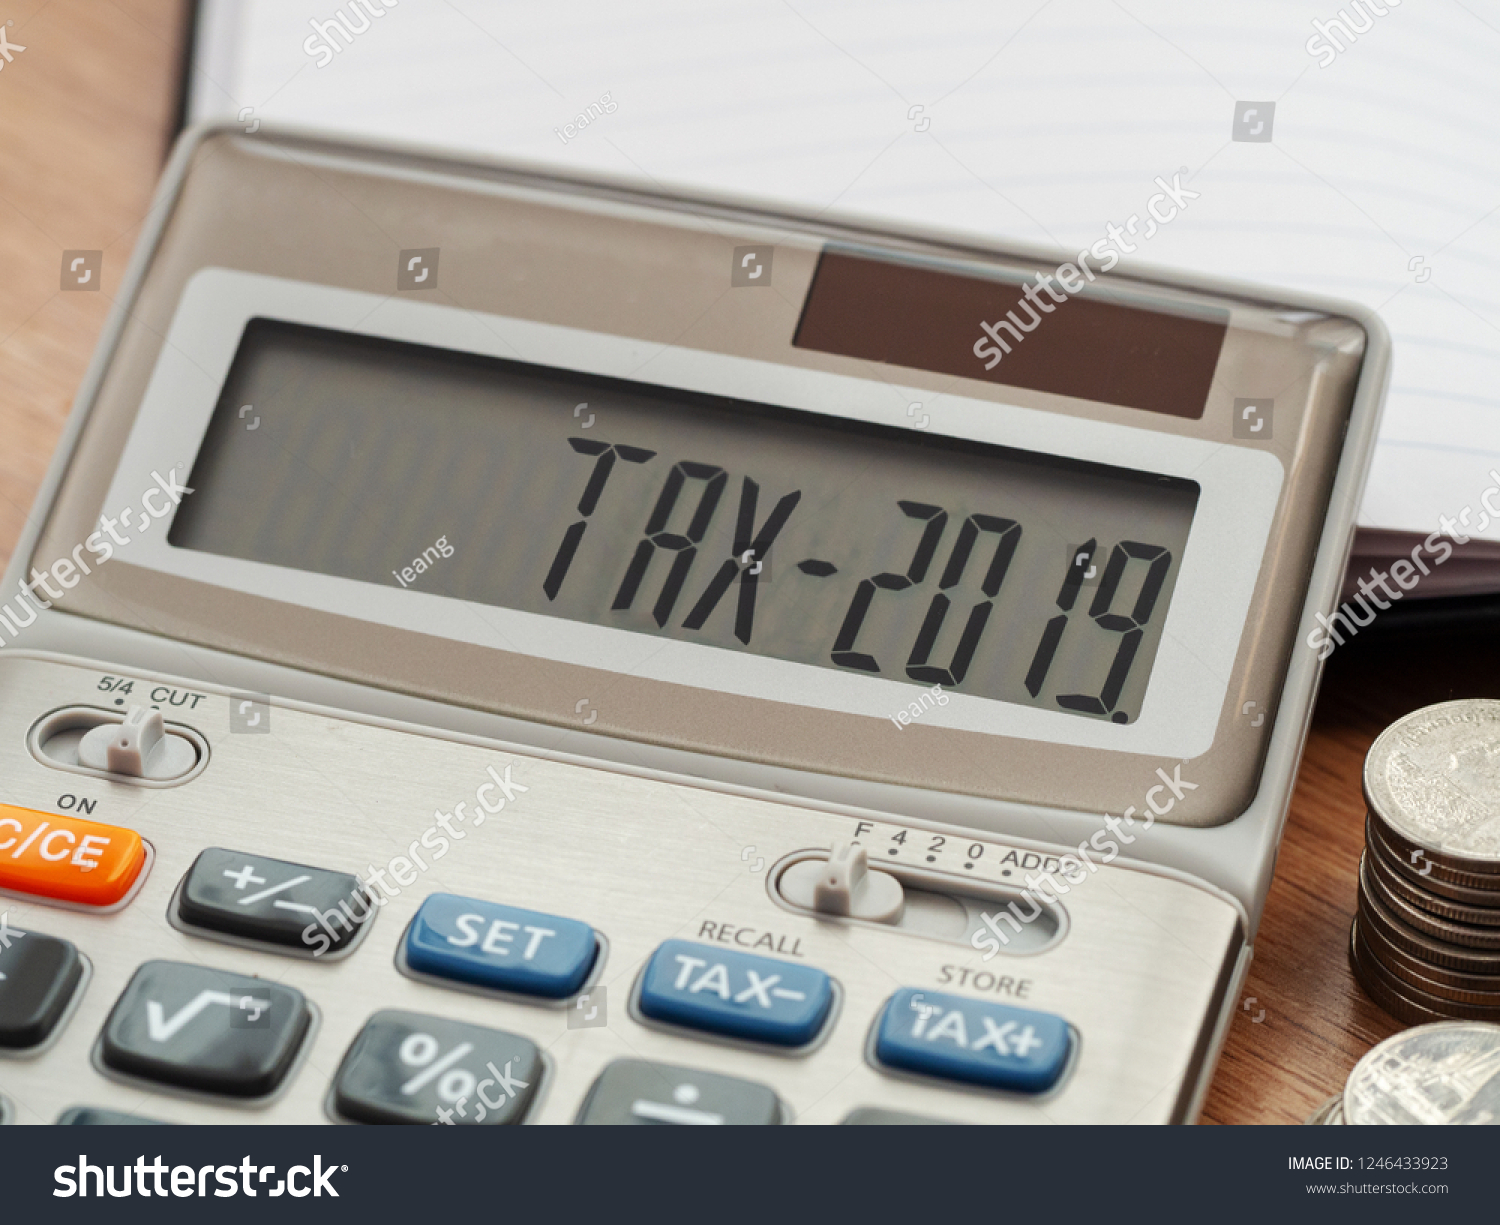 Tax word and 2019 number on calculator. Business and tax concept. Pay tax in 2019 years. #1246433923